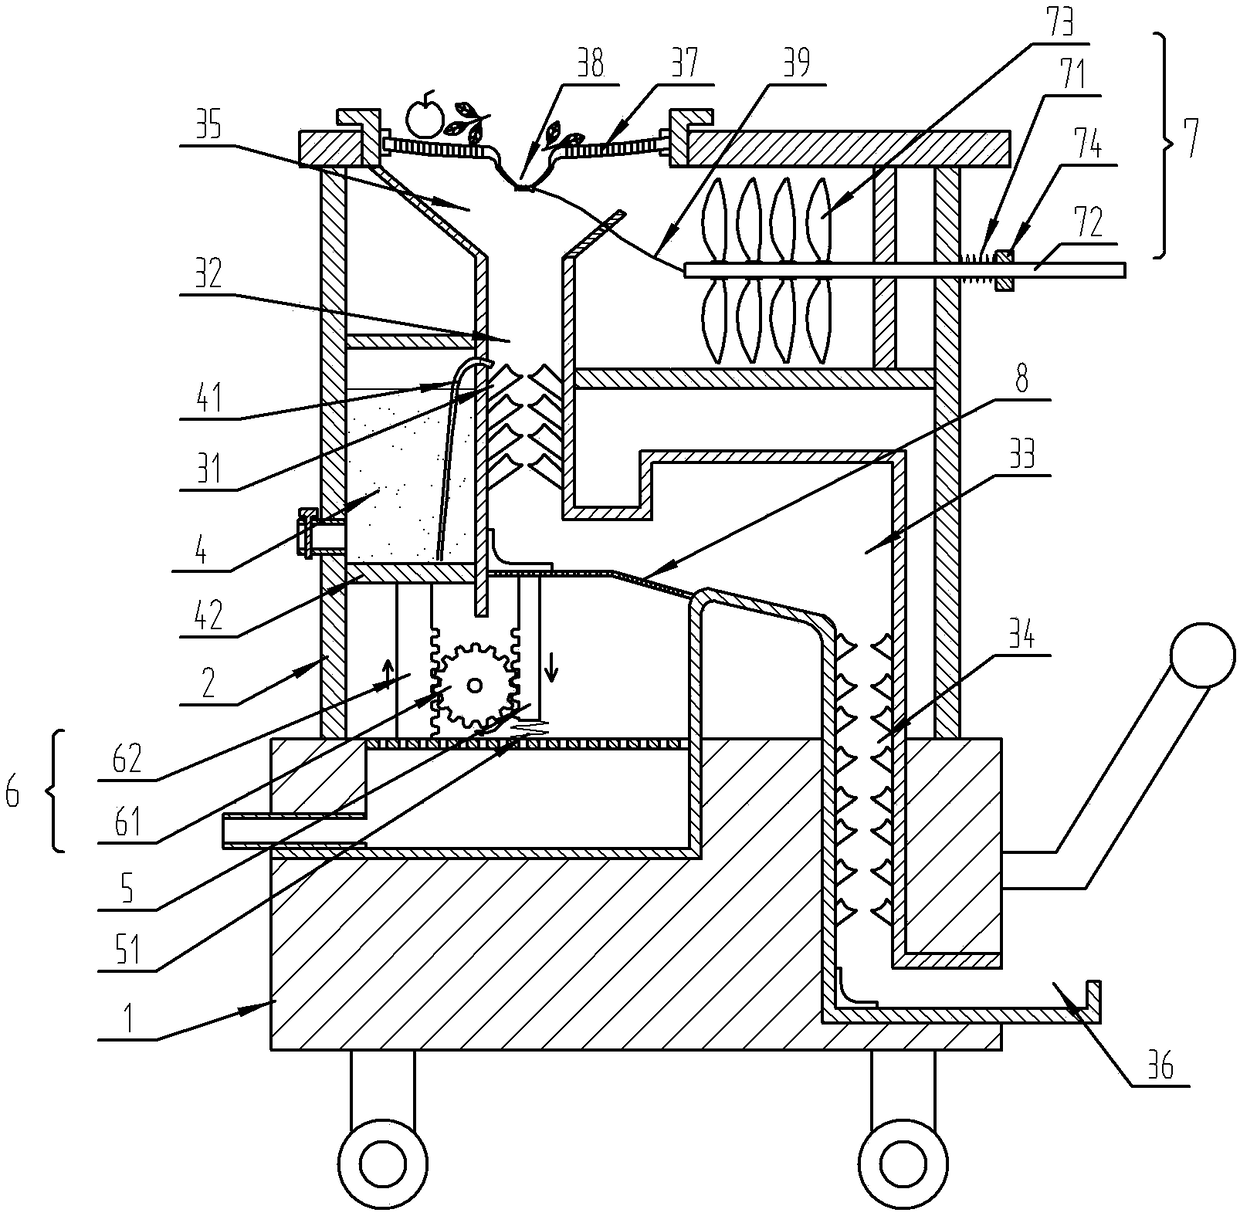 Fruit harvesting and cleaning storage device